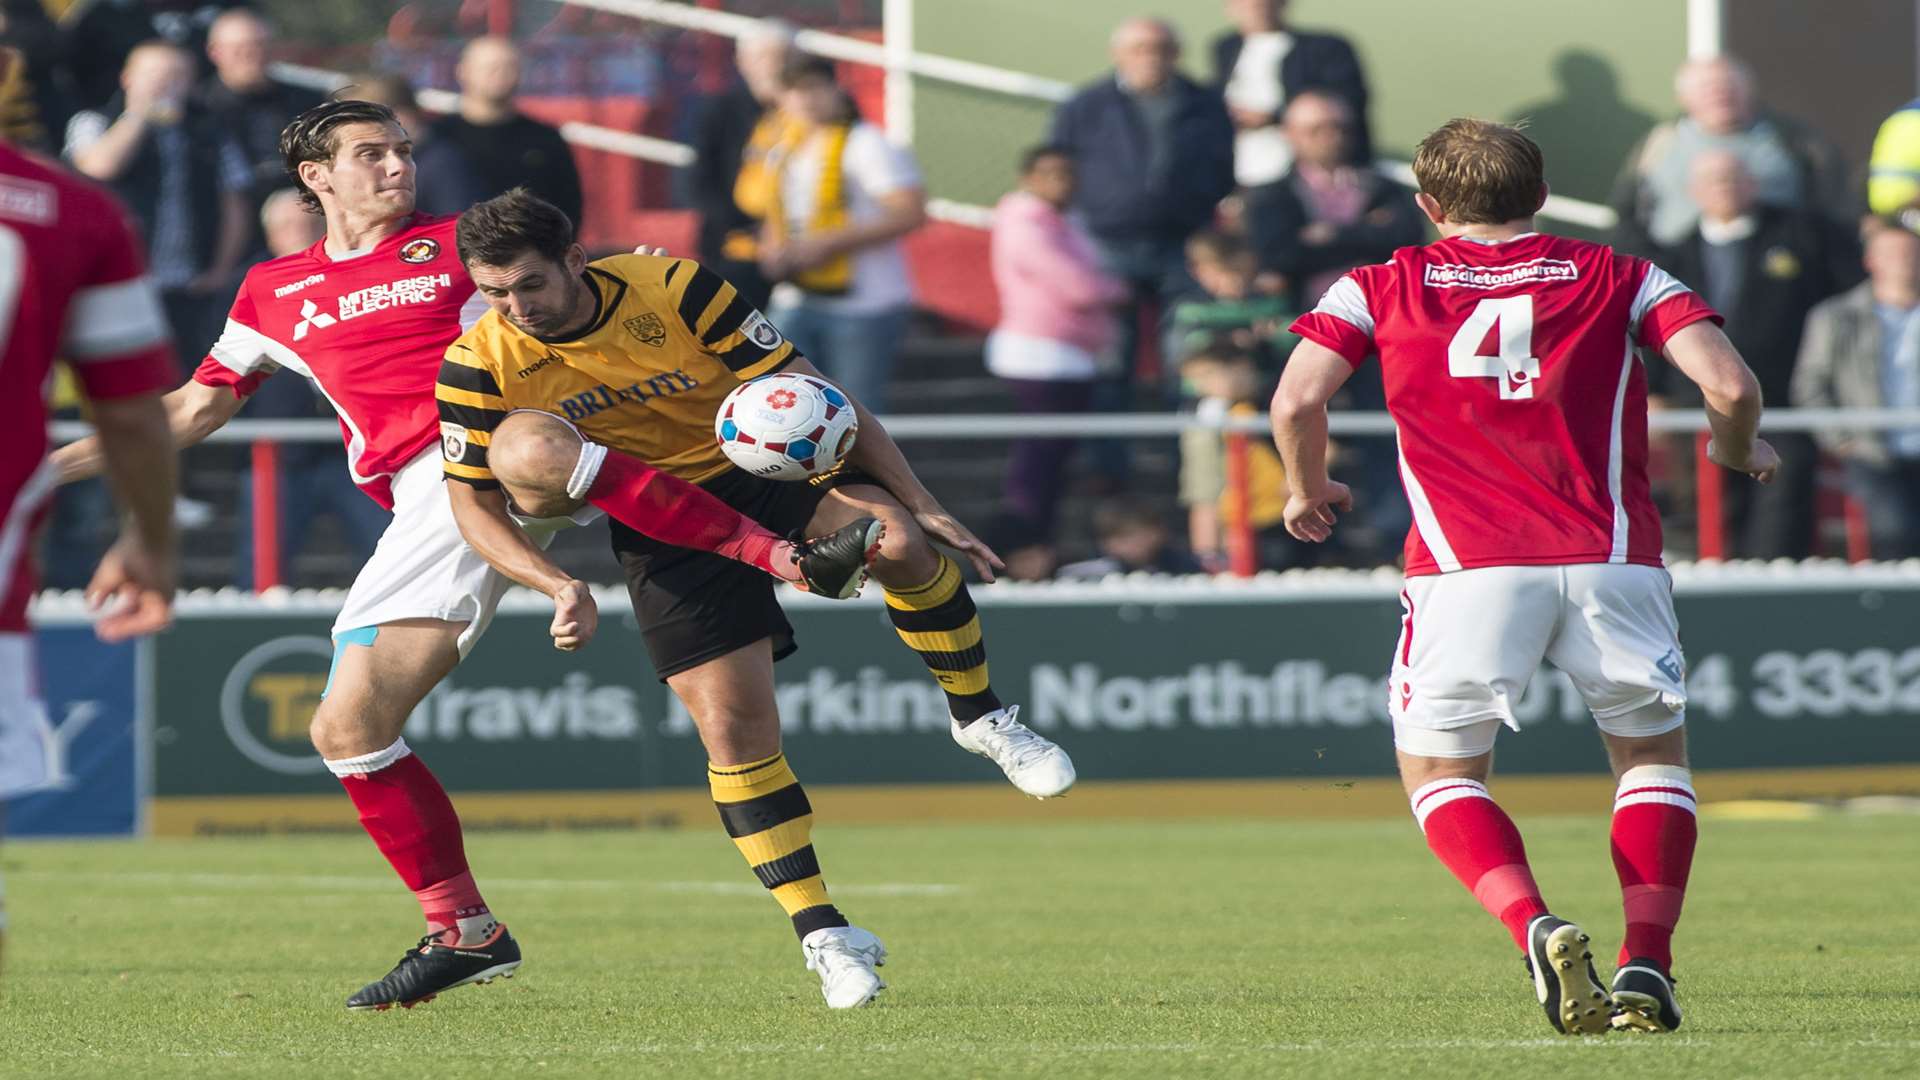 Stuart Lewis (4) looks on as Tom Bonner challenges Maidstone's Jay May Picture: Andy Payton